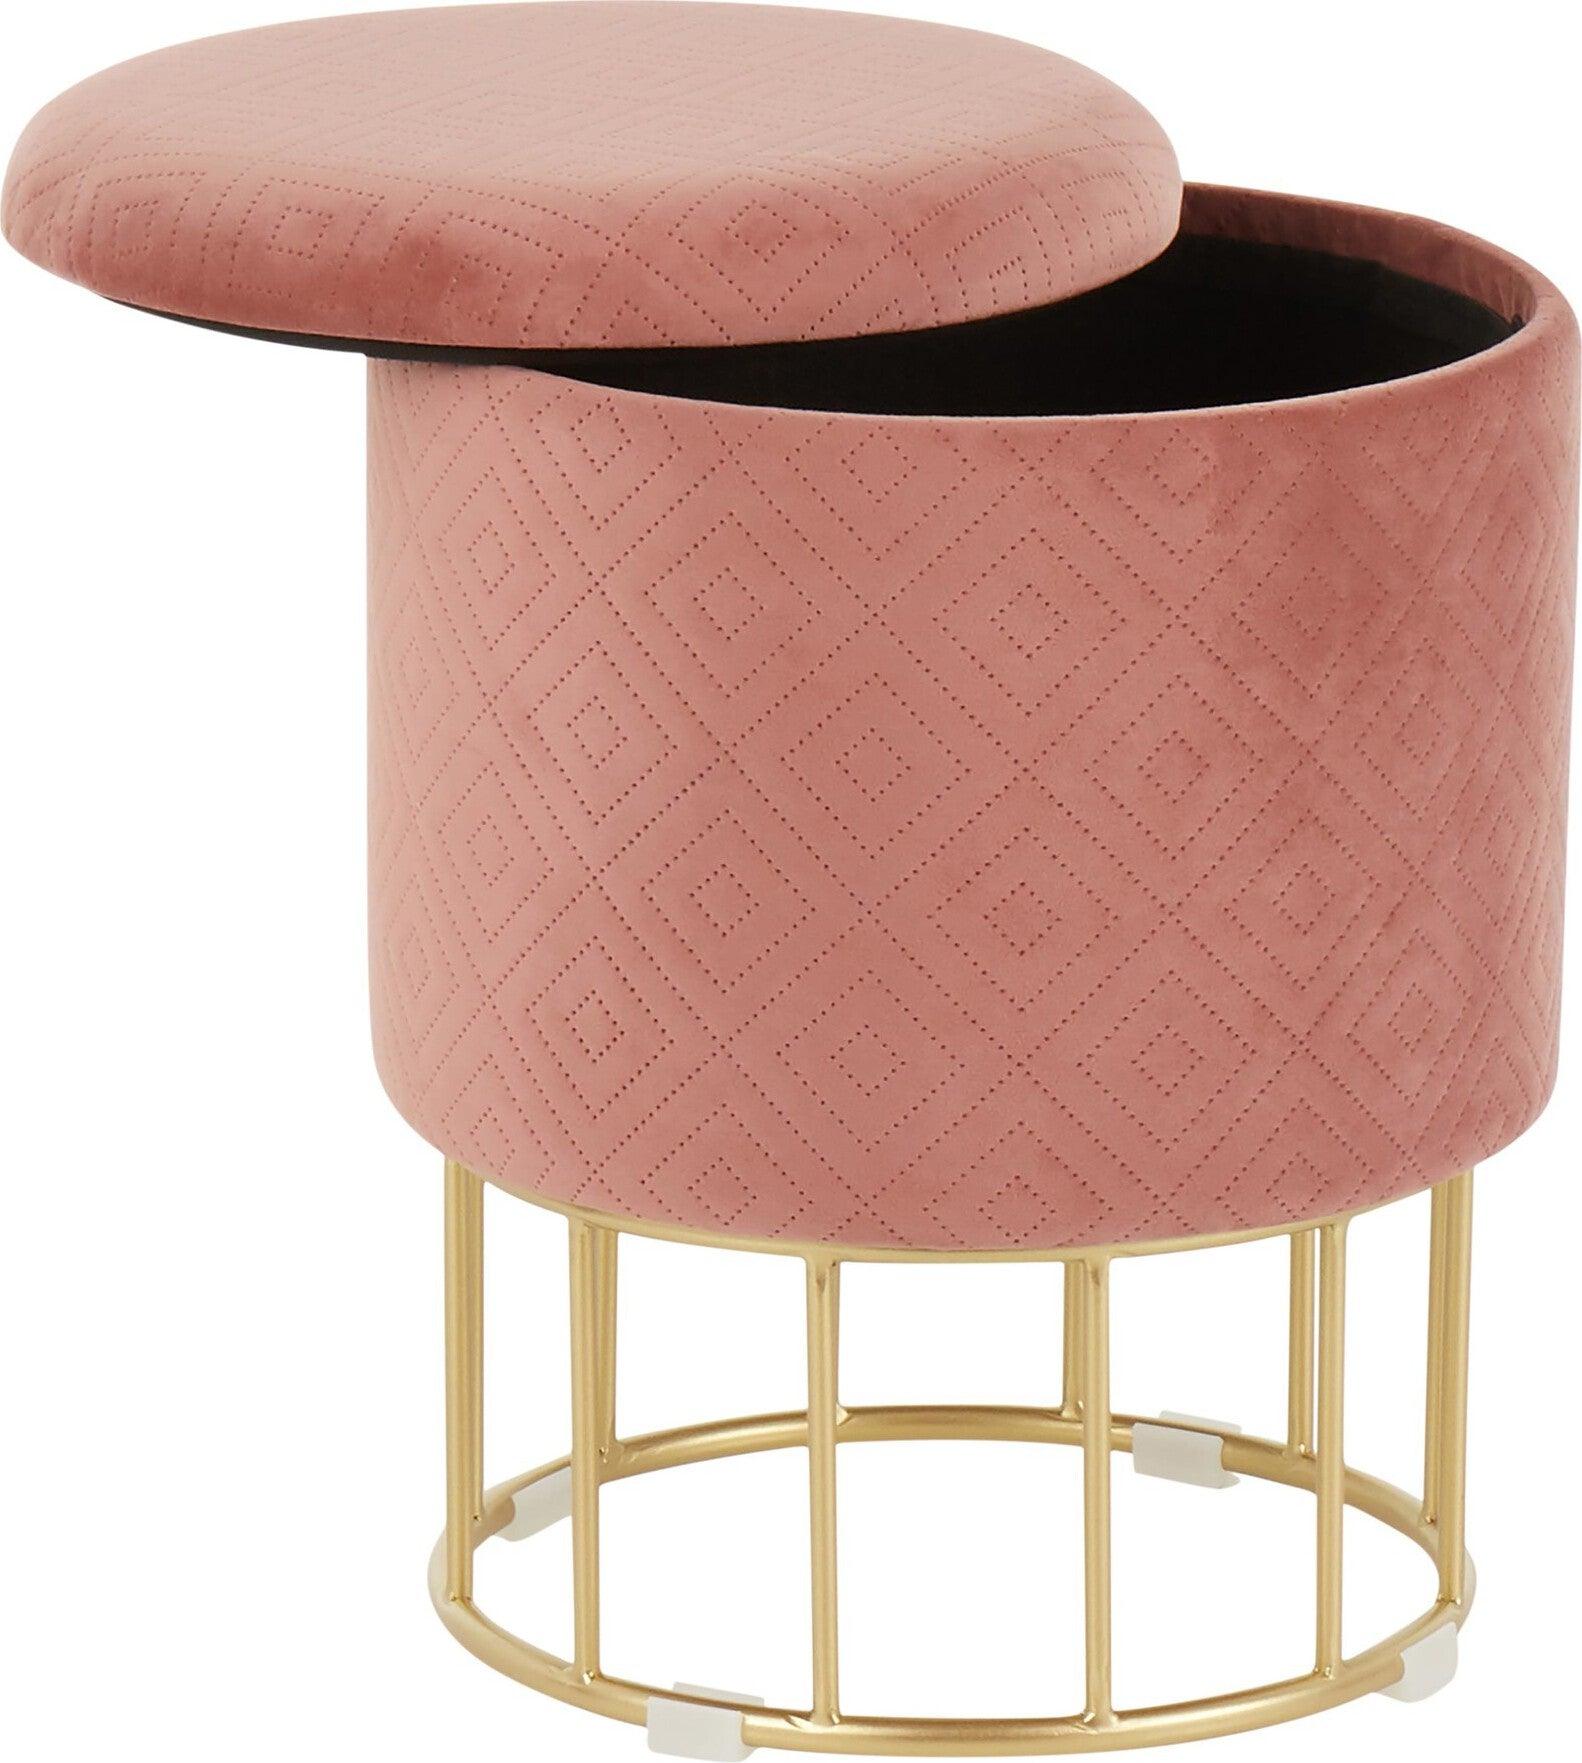 Lumisource Ottomans & Stools - Canary Contemporary Ottoman Gold Metal & Pink Velvet